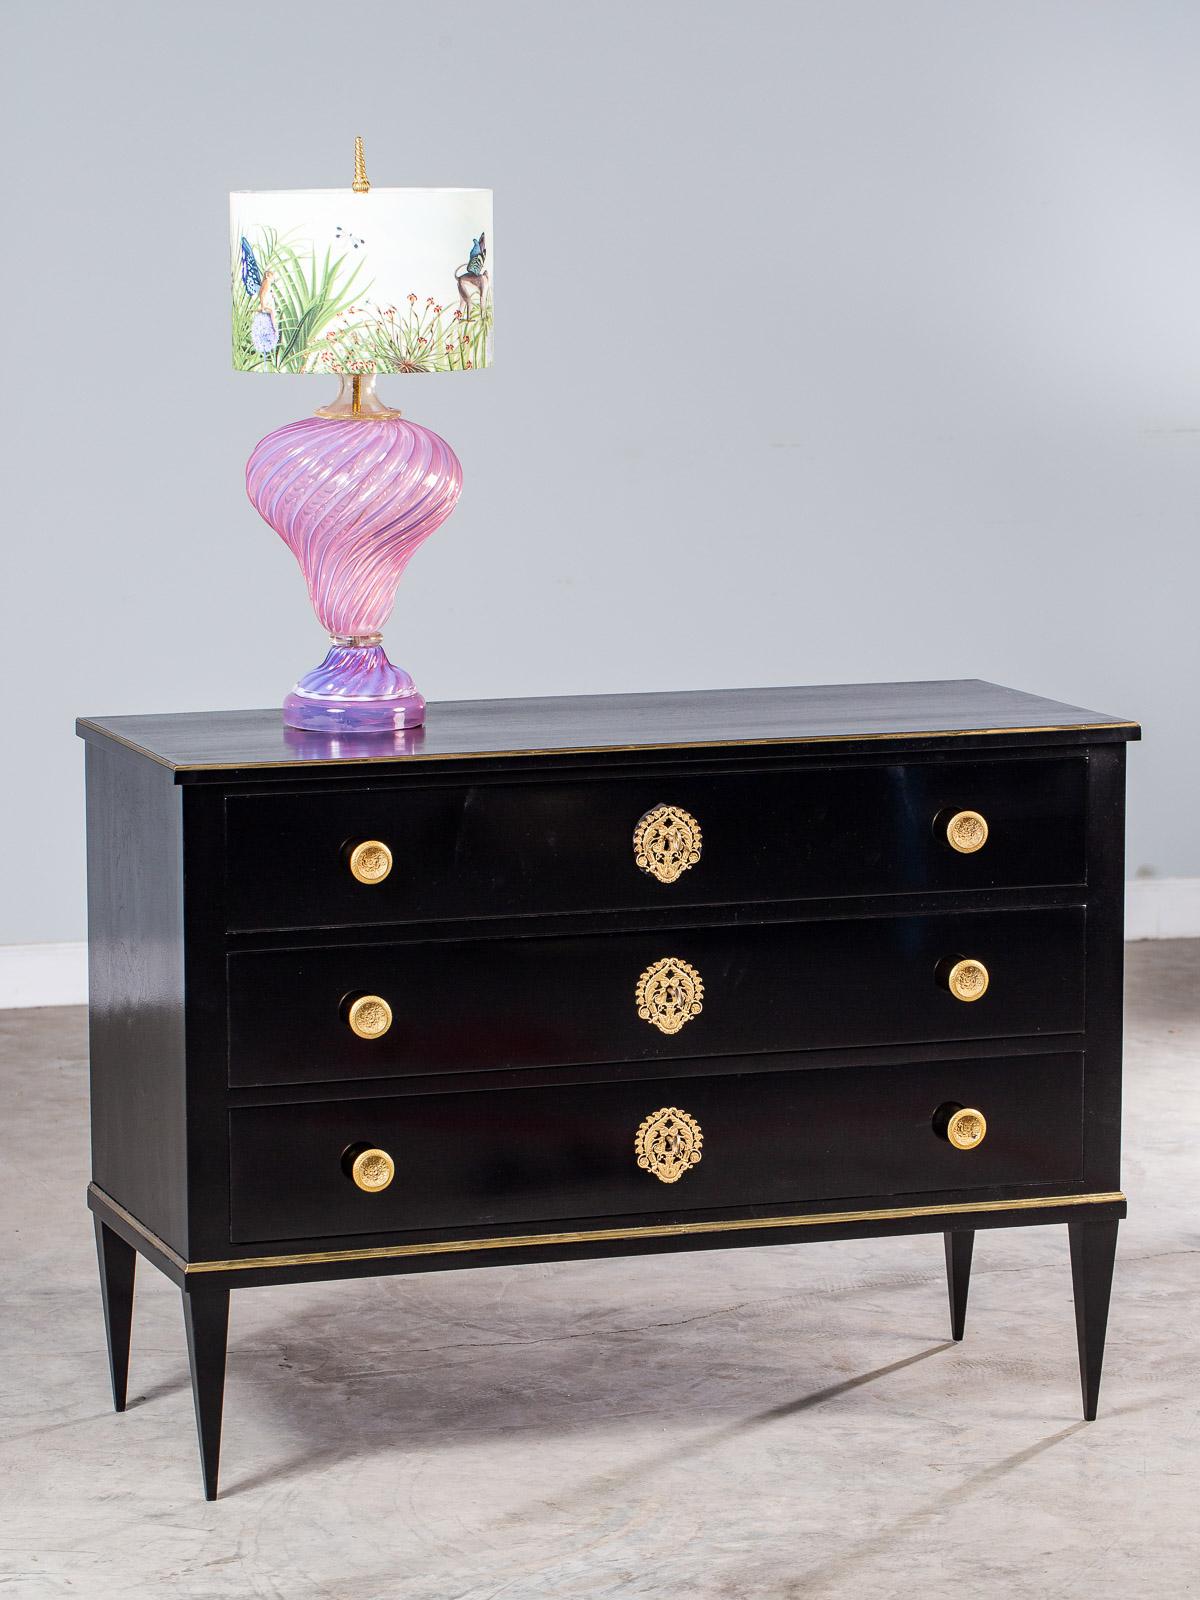 A striking antique Italian Empire ebonized neoclassical chest of drawers, circa 1820. The superb modern lines of this antique Italian chest remain as potent today as when they were first seen at the beginning of the nineteenth century. Rectangular